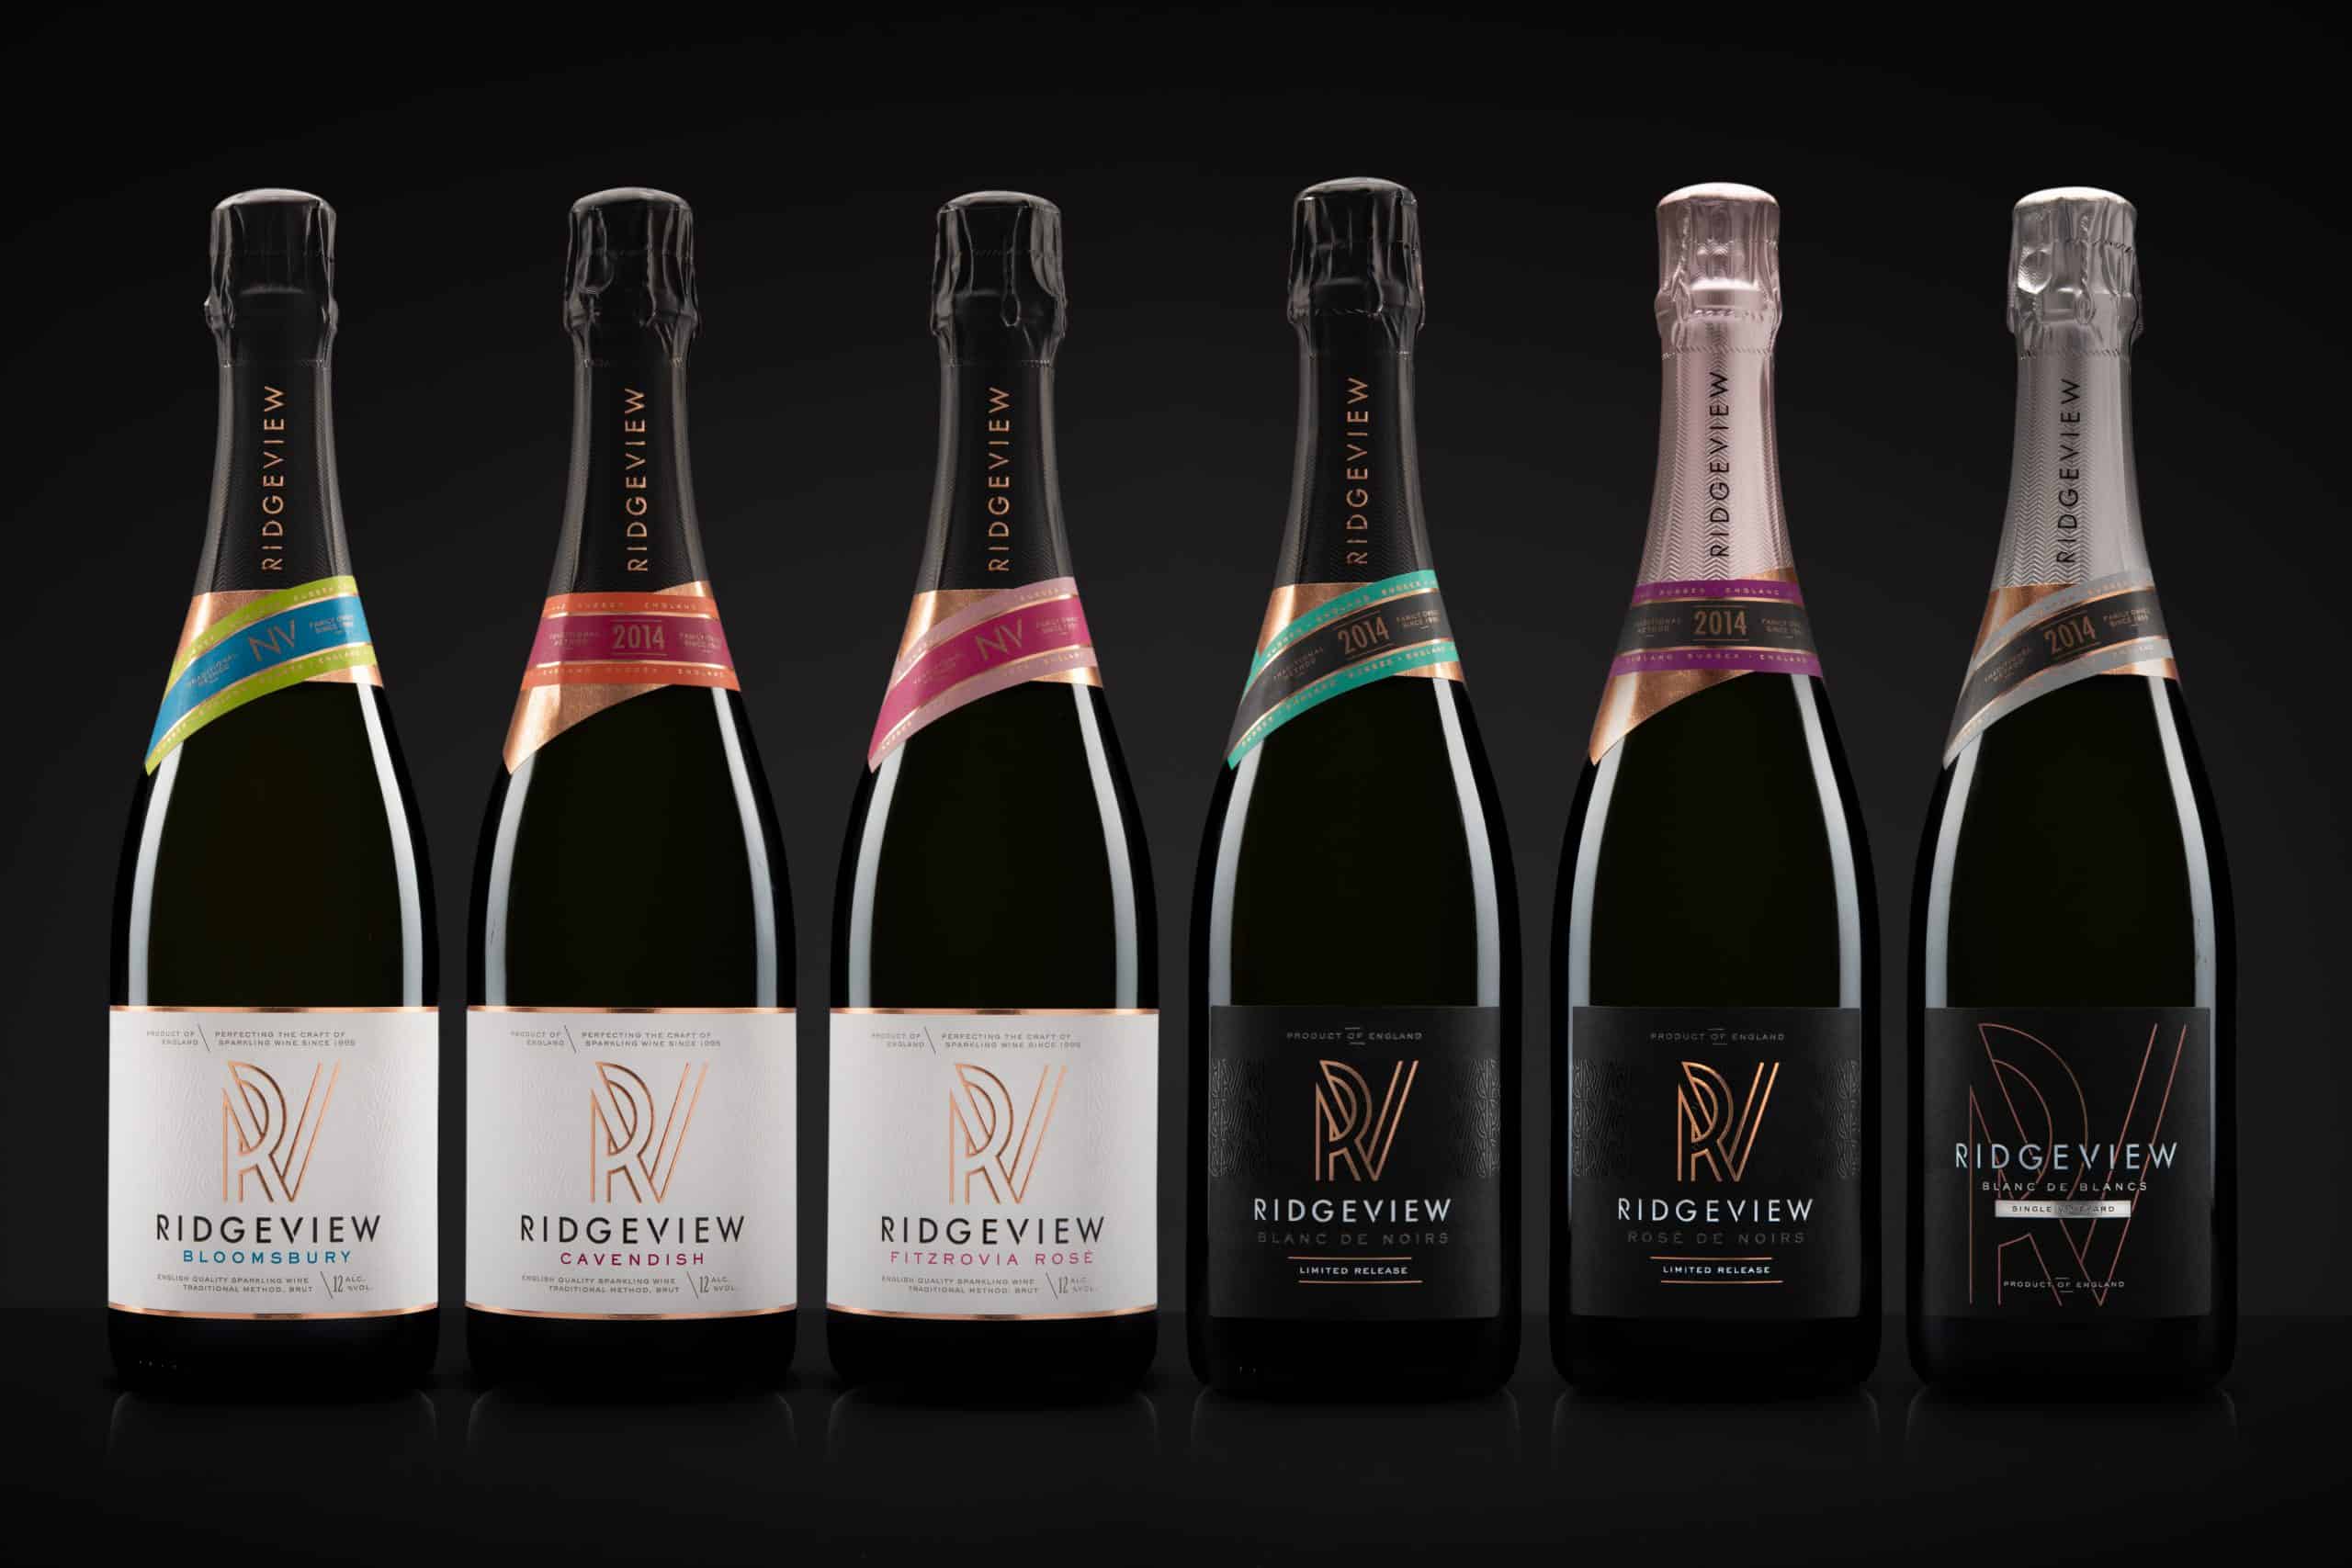 Ridgeview's English sparkling wine collection